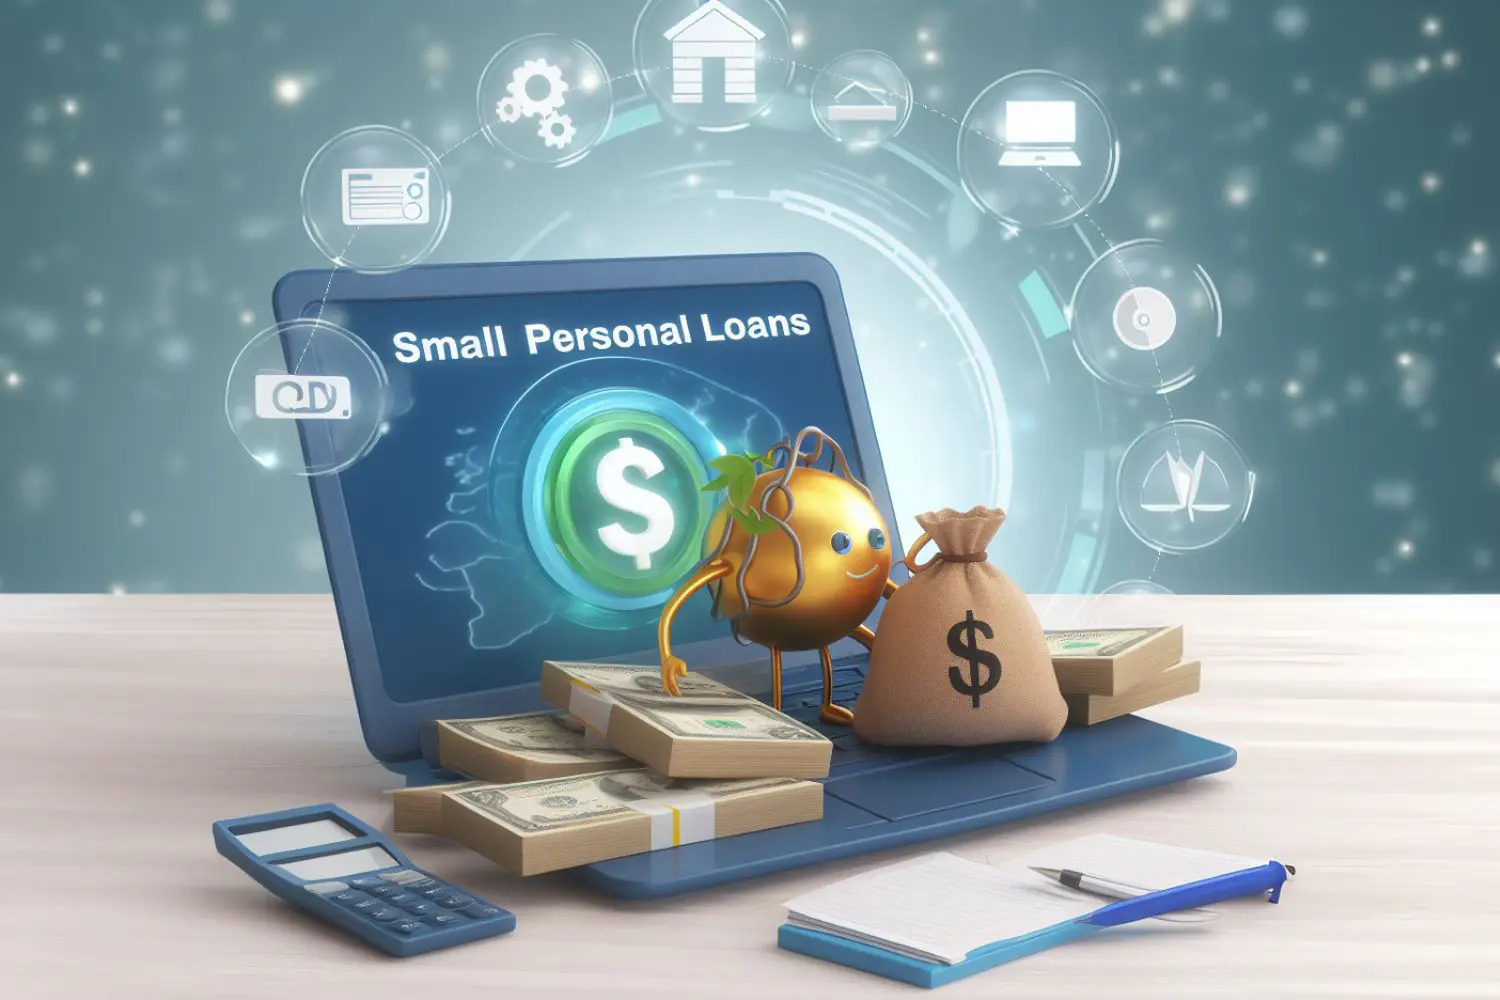 Online Small Personal Loans: A Good and Fast Funding Solution